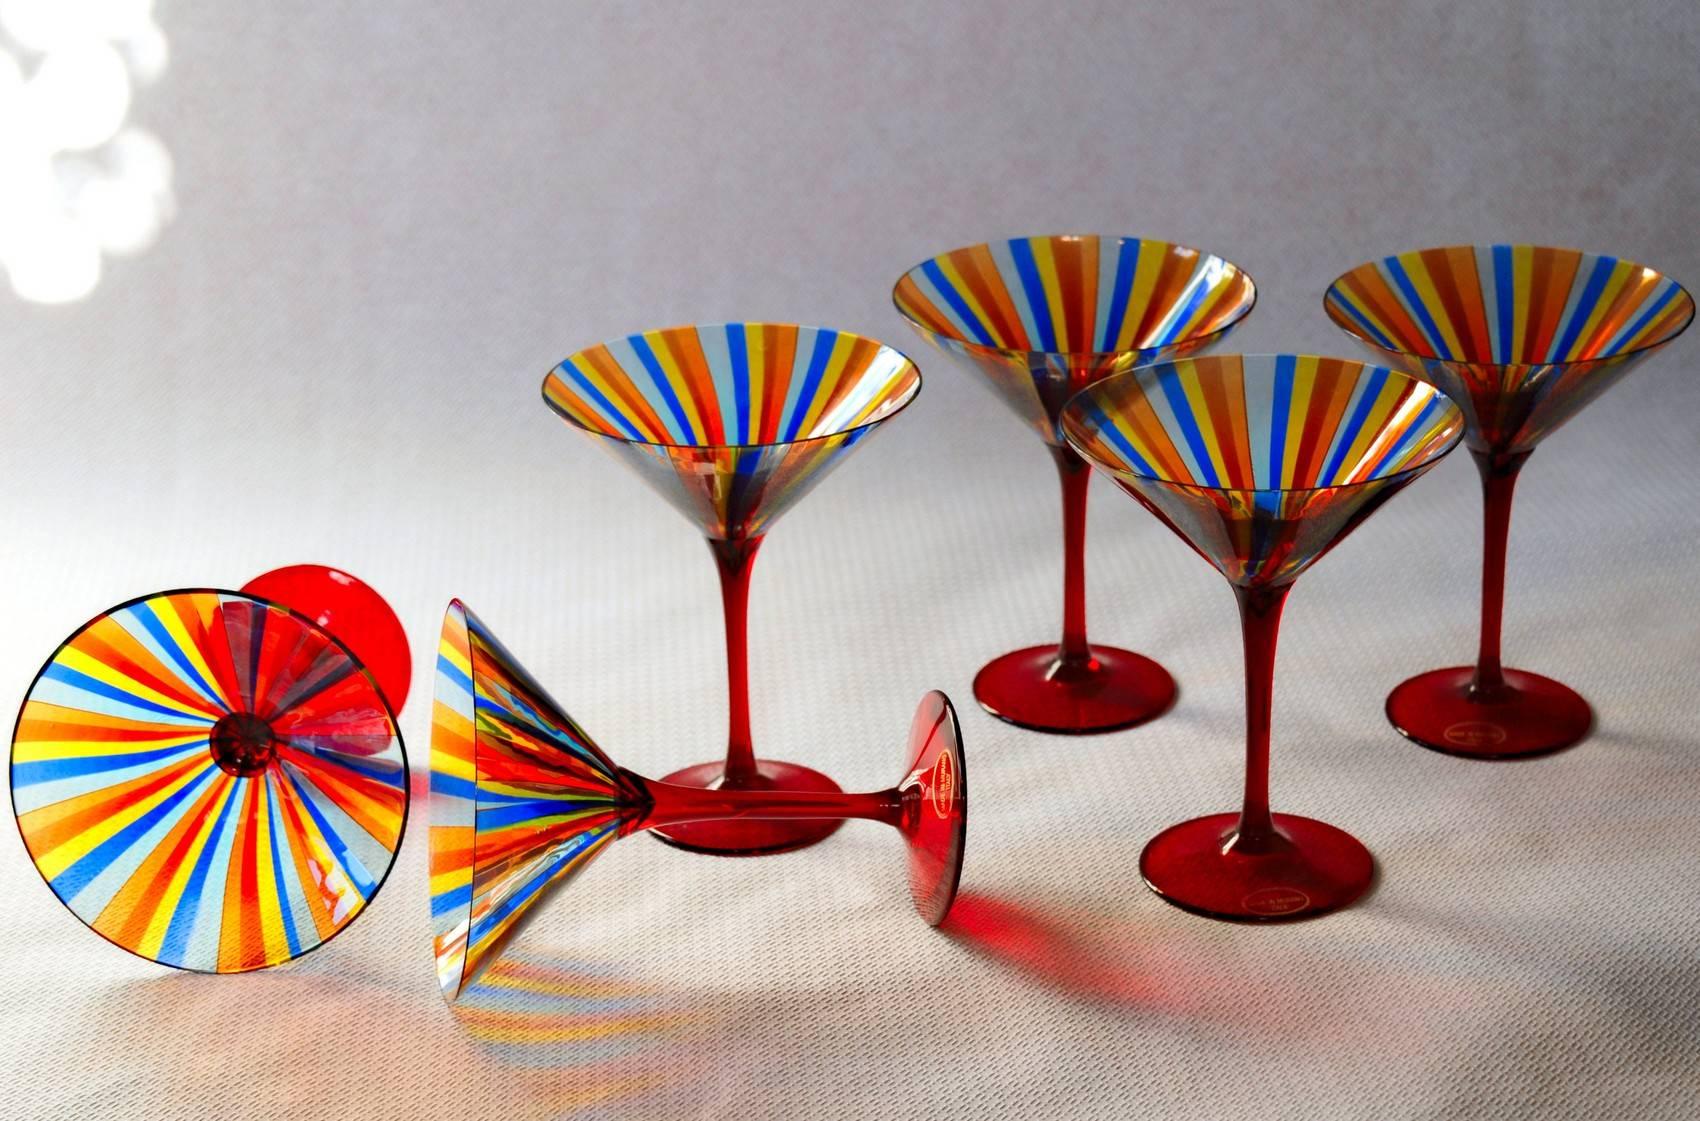 Mid-20th Century Six Martini Glass, Cenedese a Canne, Cadmium Red Stem, Signed, circa 1960